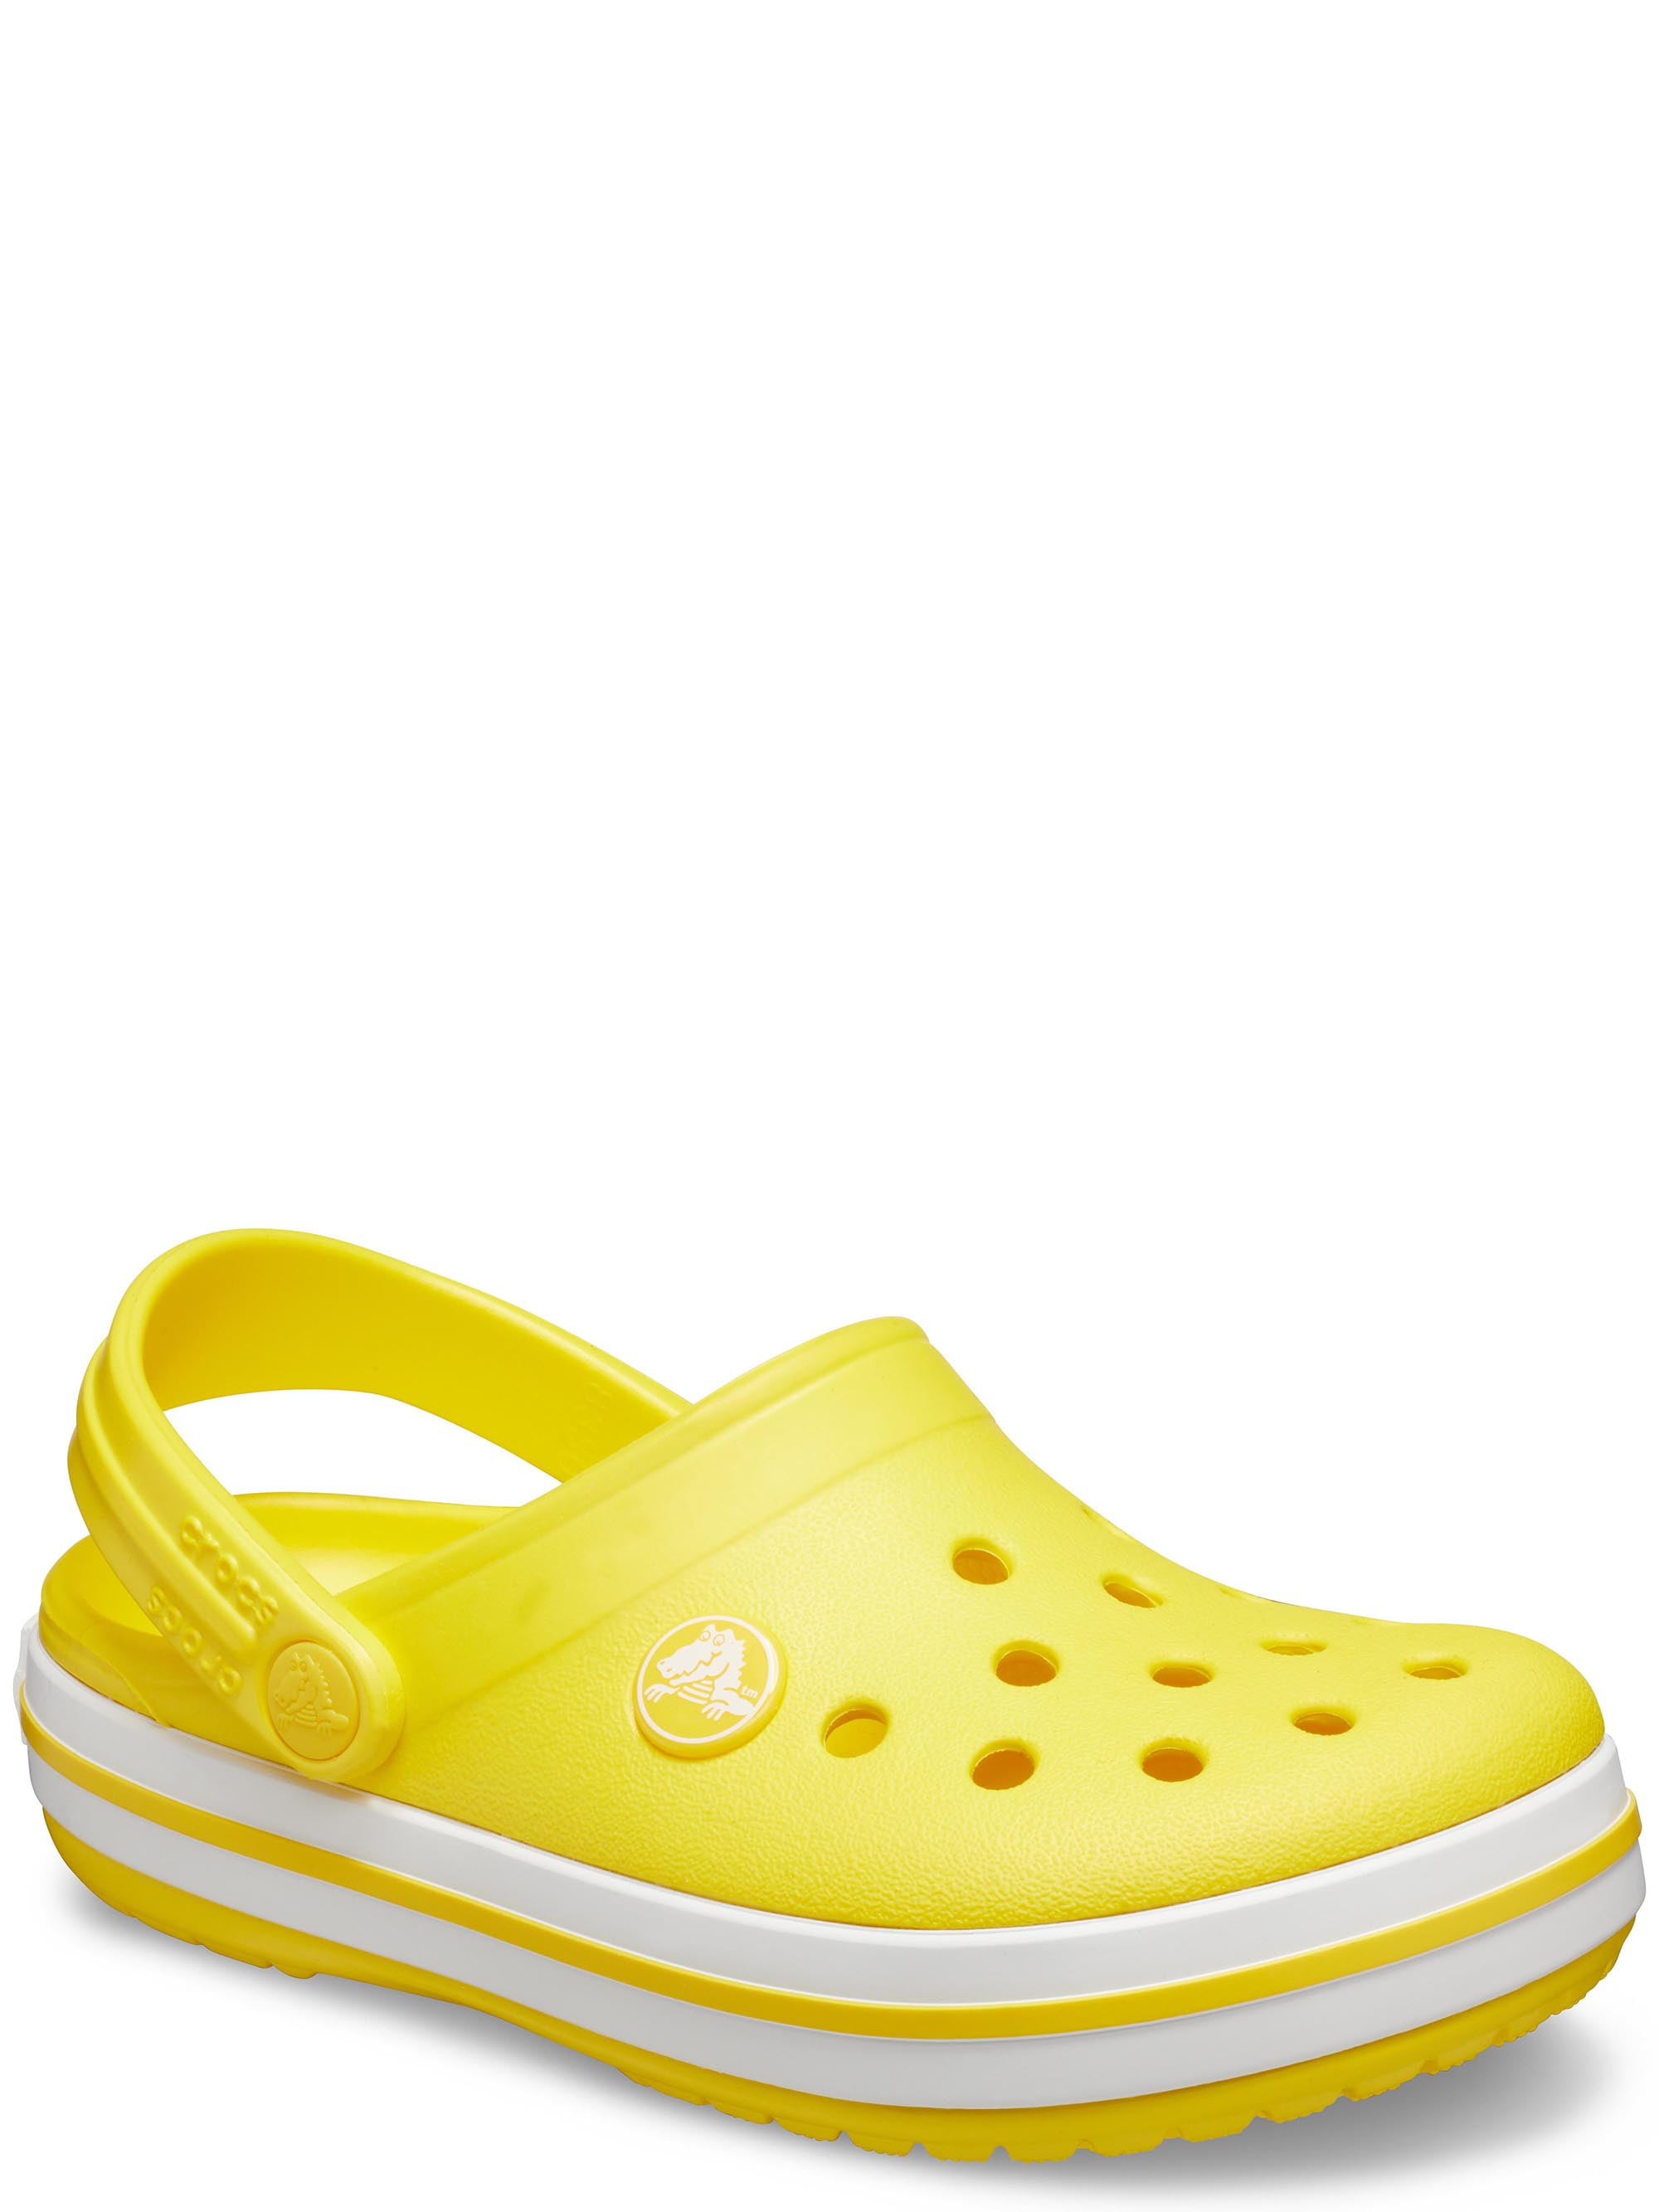 yellow crocs for toddlers